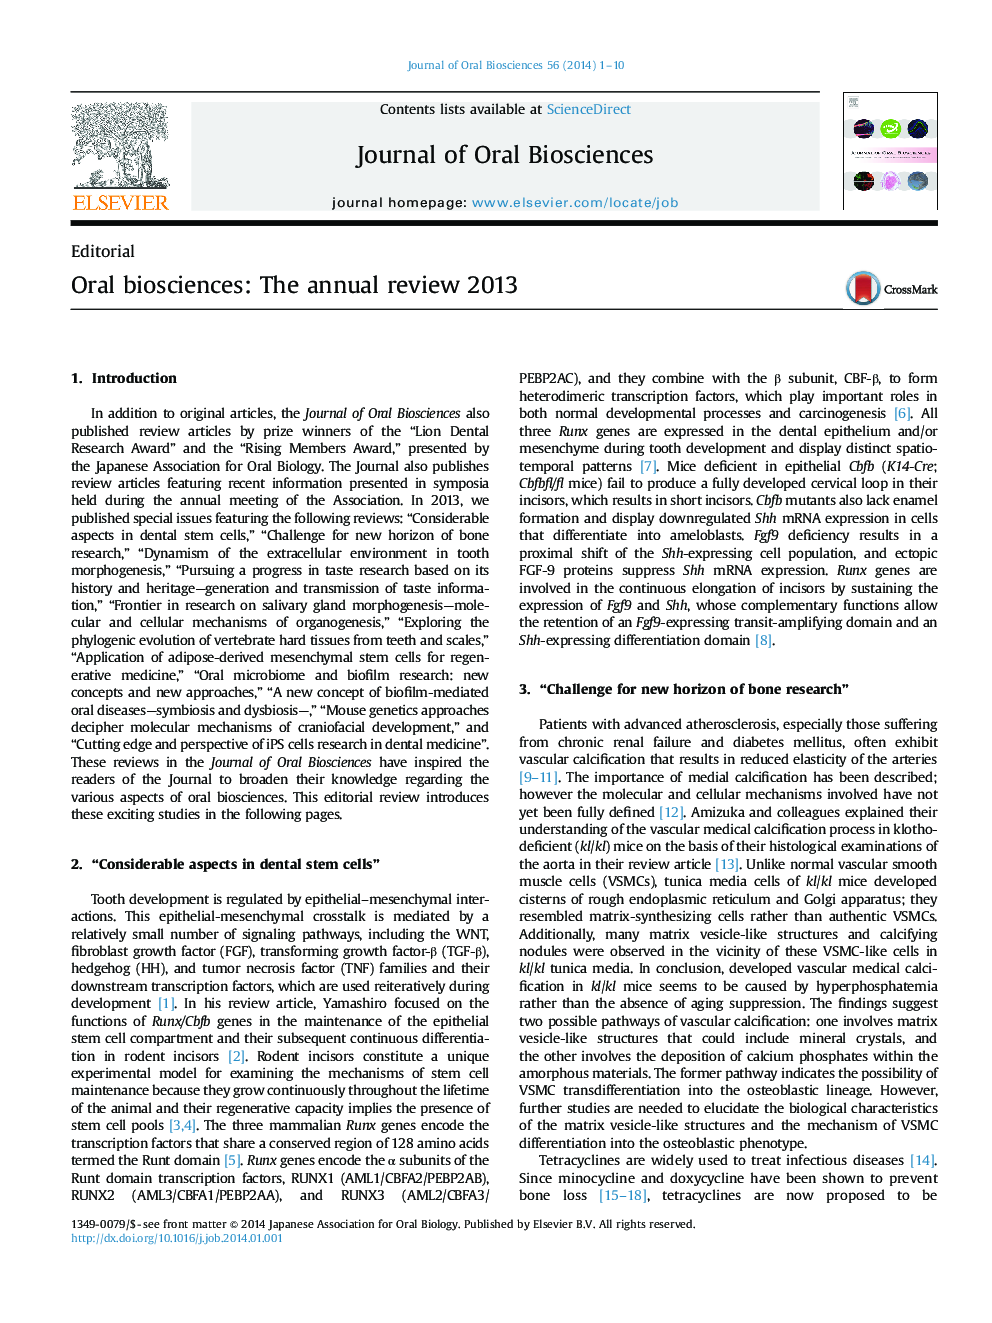 Oral biosciences: The annual review 2013